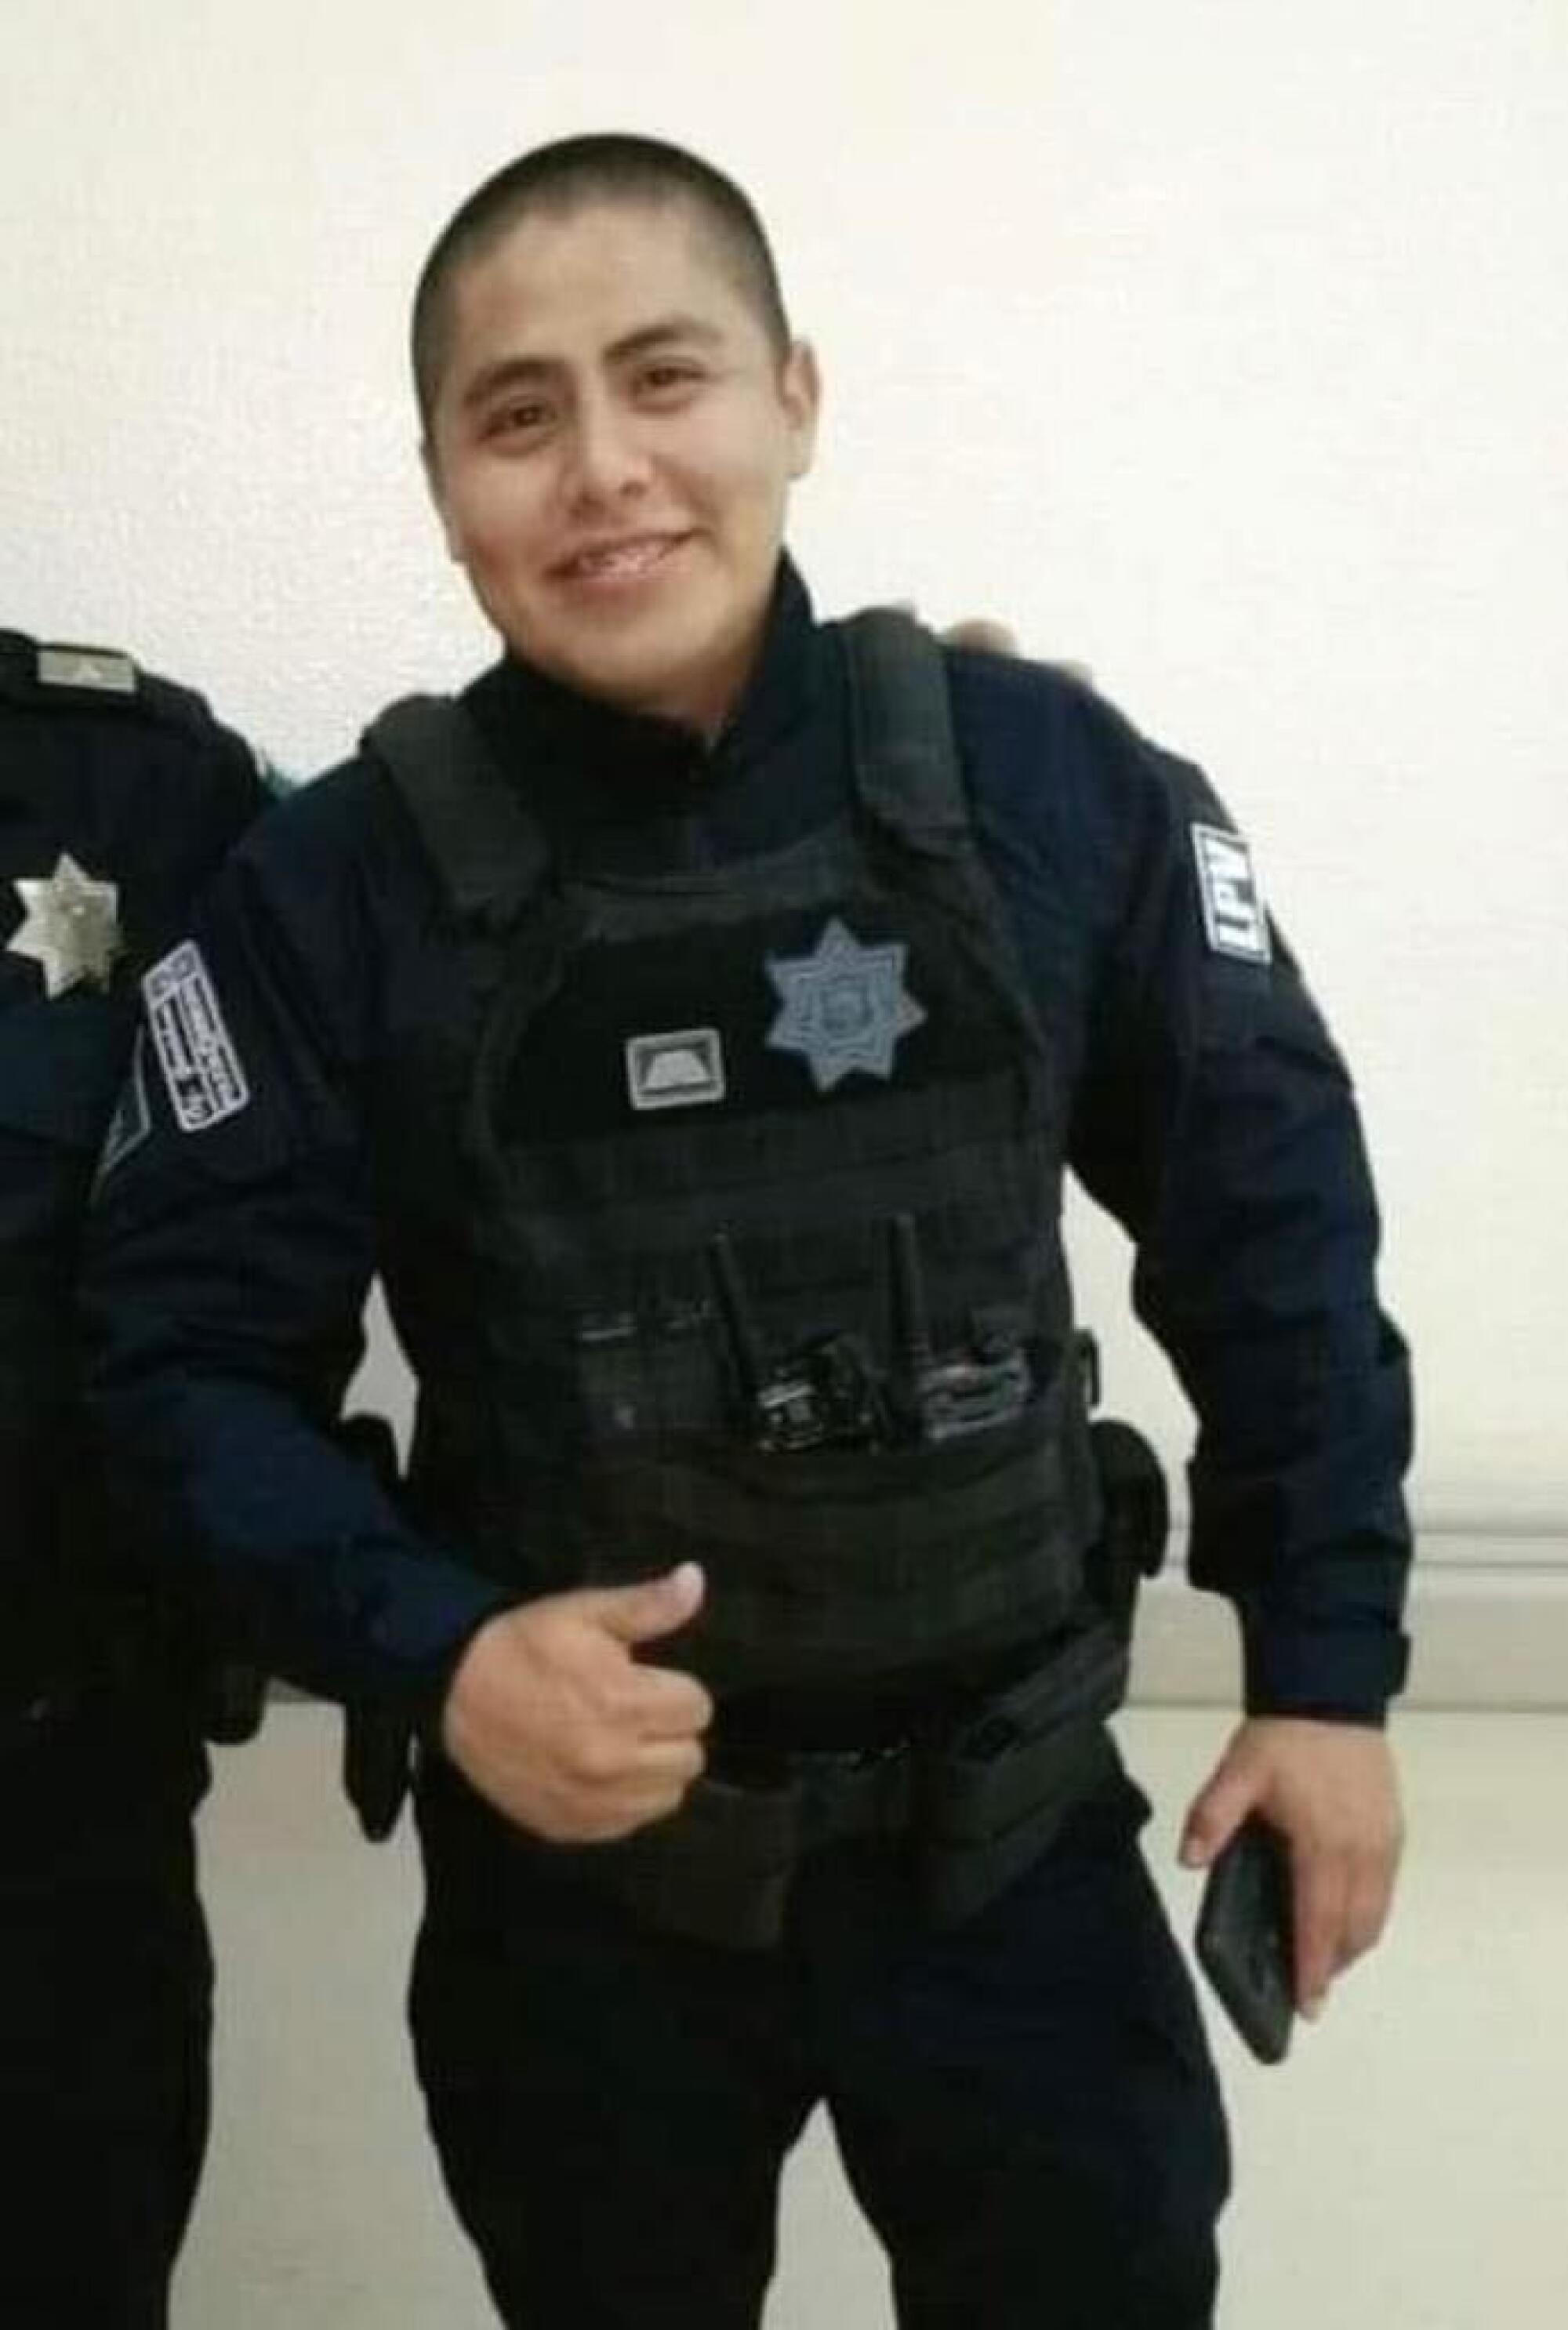 A young man in a police uniform gives a thumbs-up.